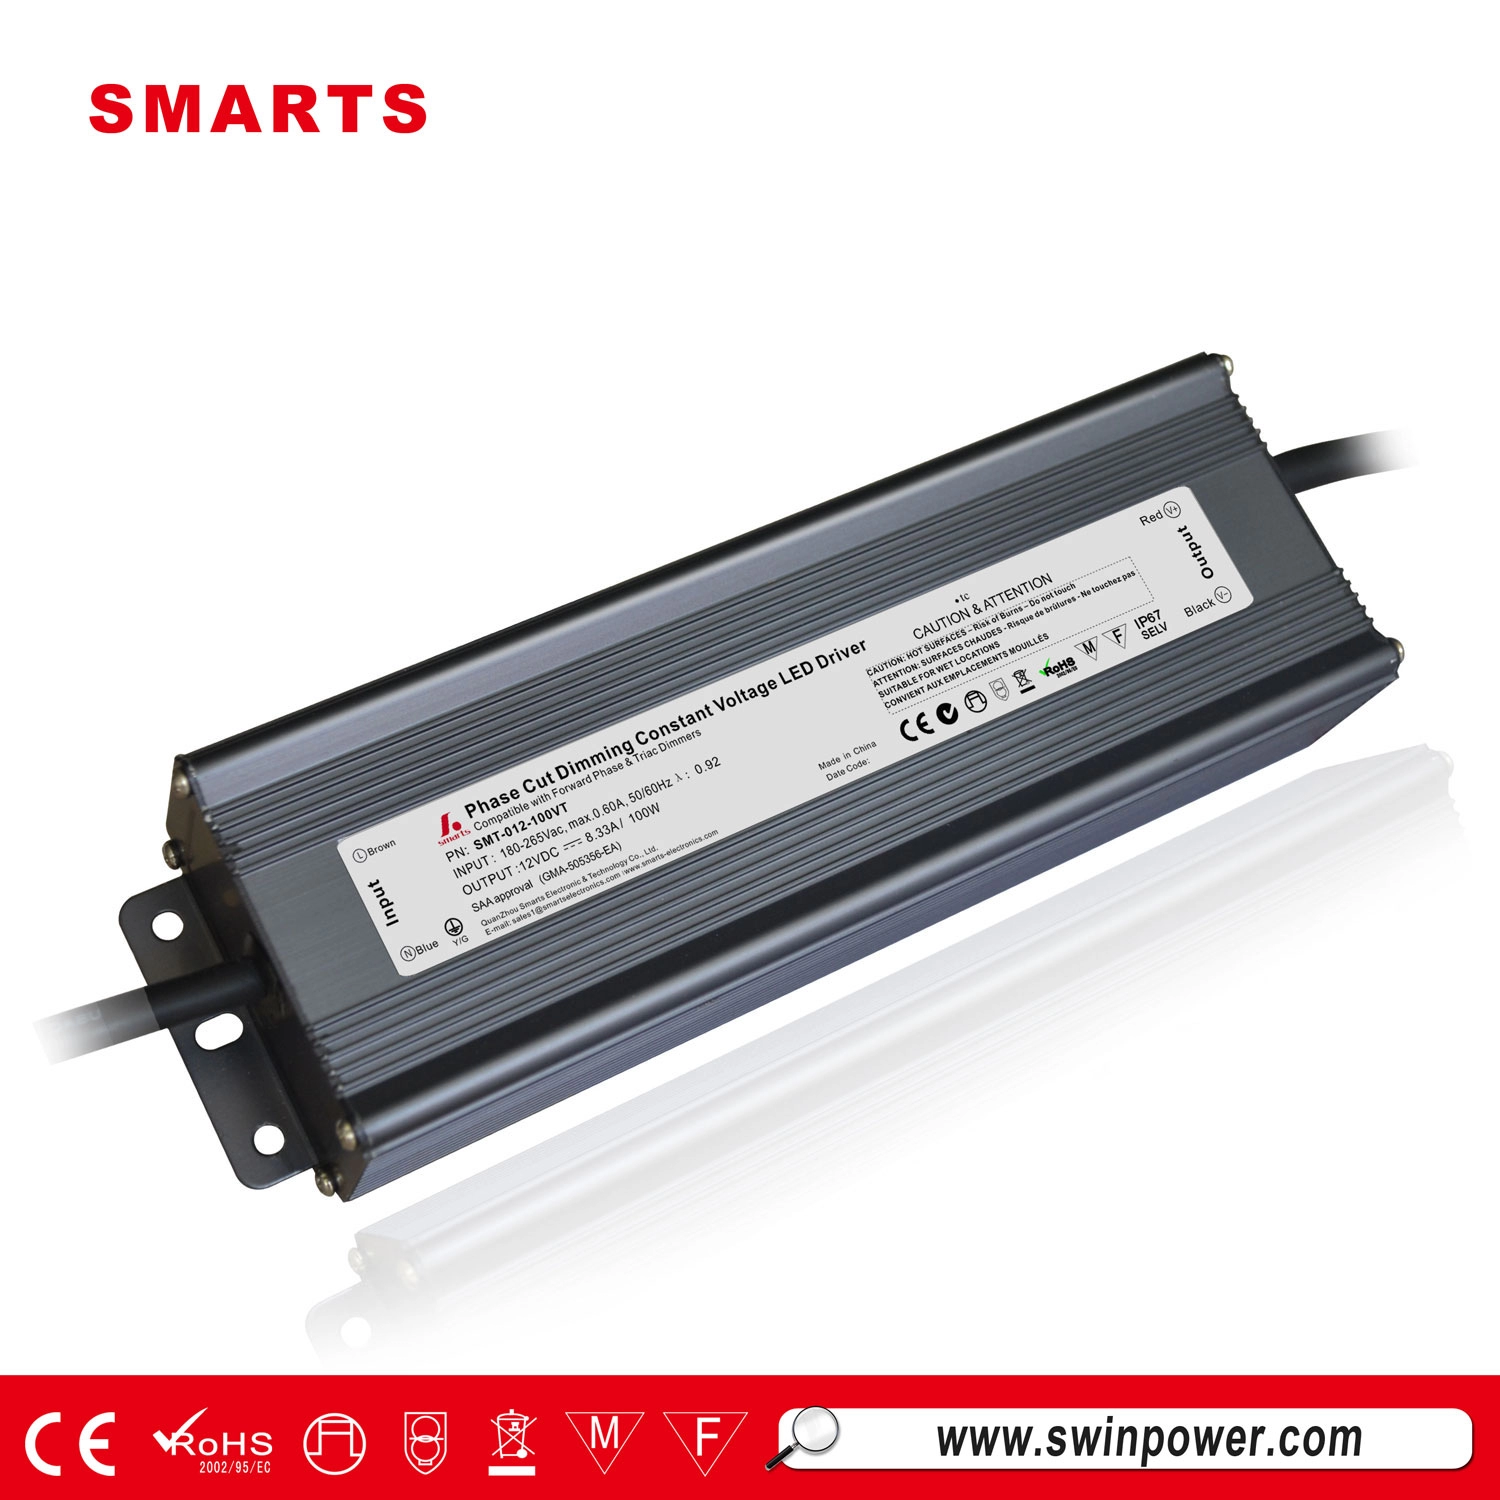 12v power supply 100w constant voltage LED driver triac power source for led strip lights